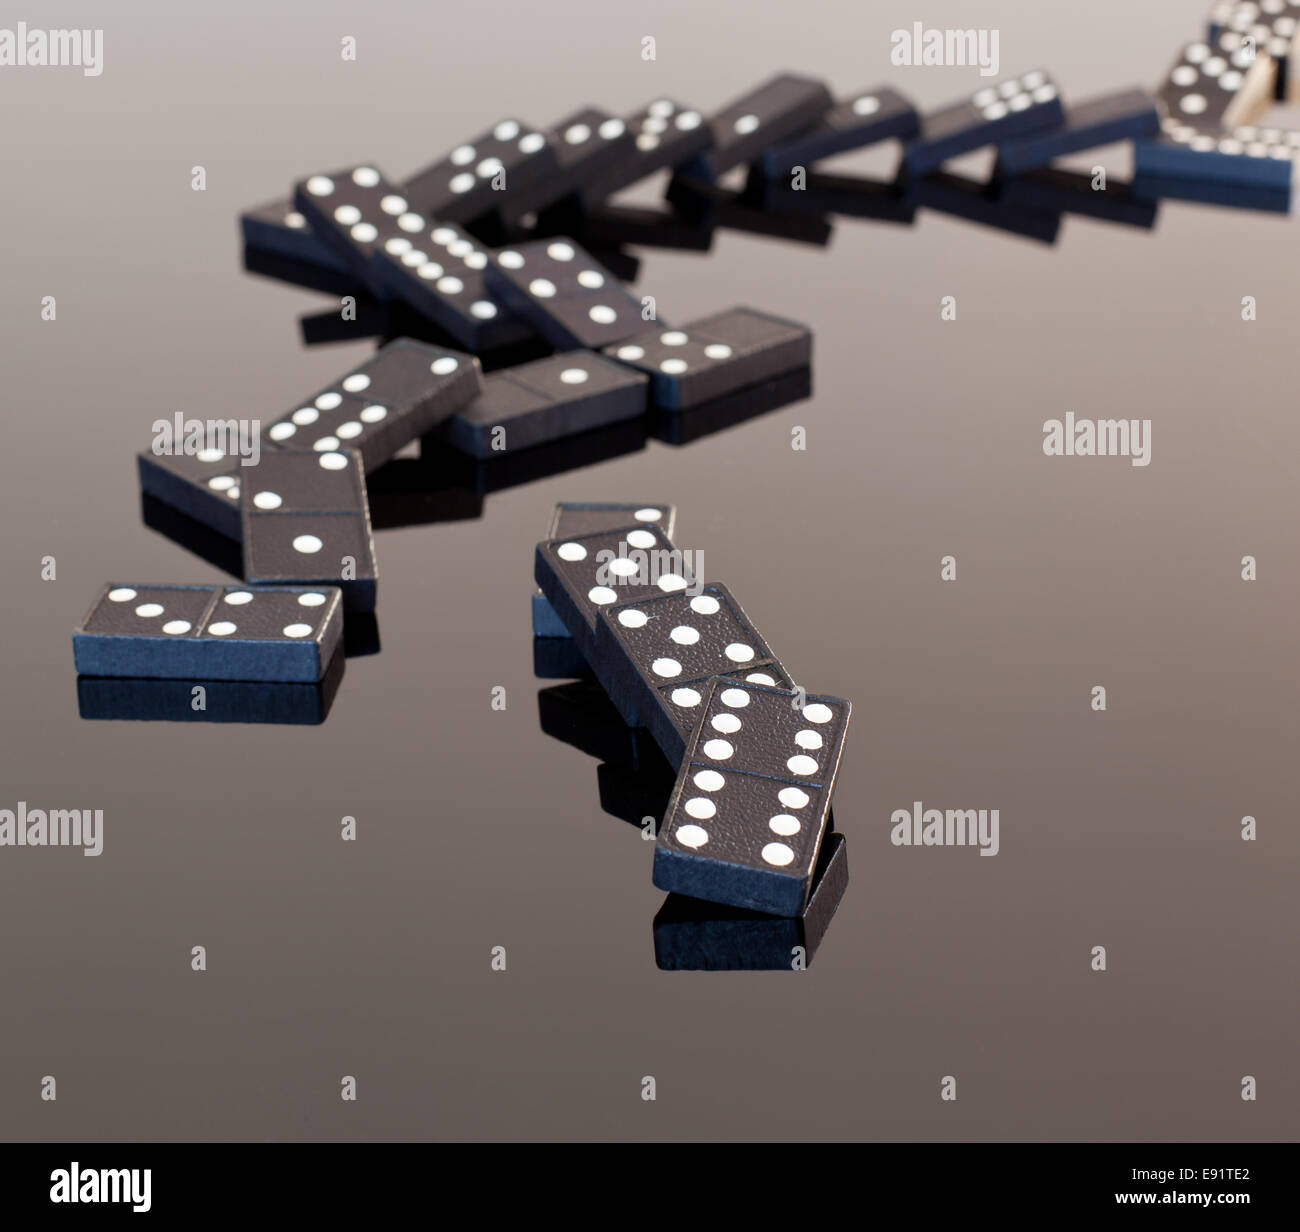 Dominoes collapsed on reflective surface Stock Photo